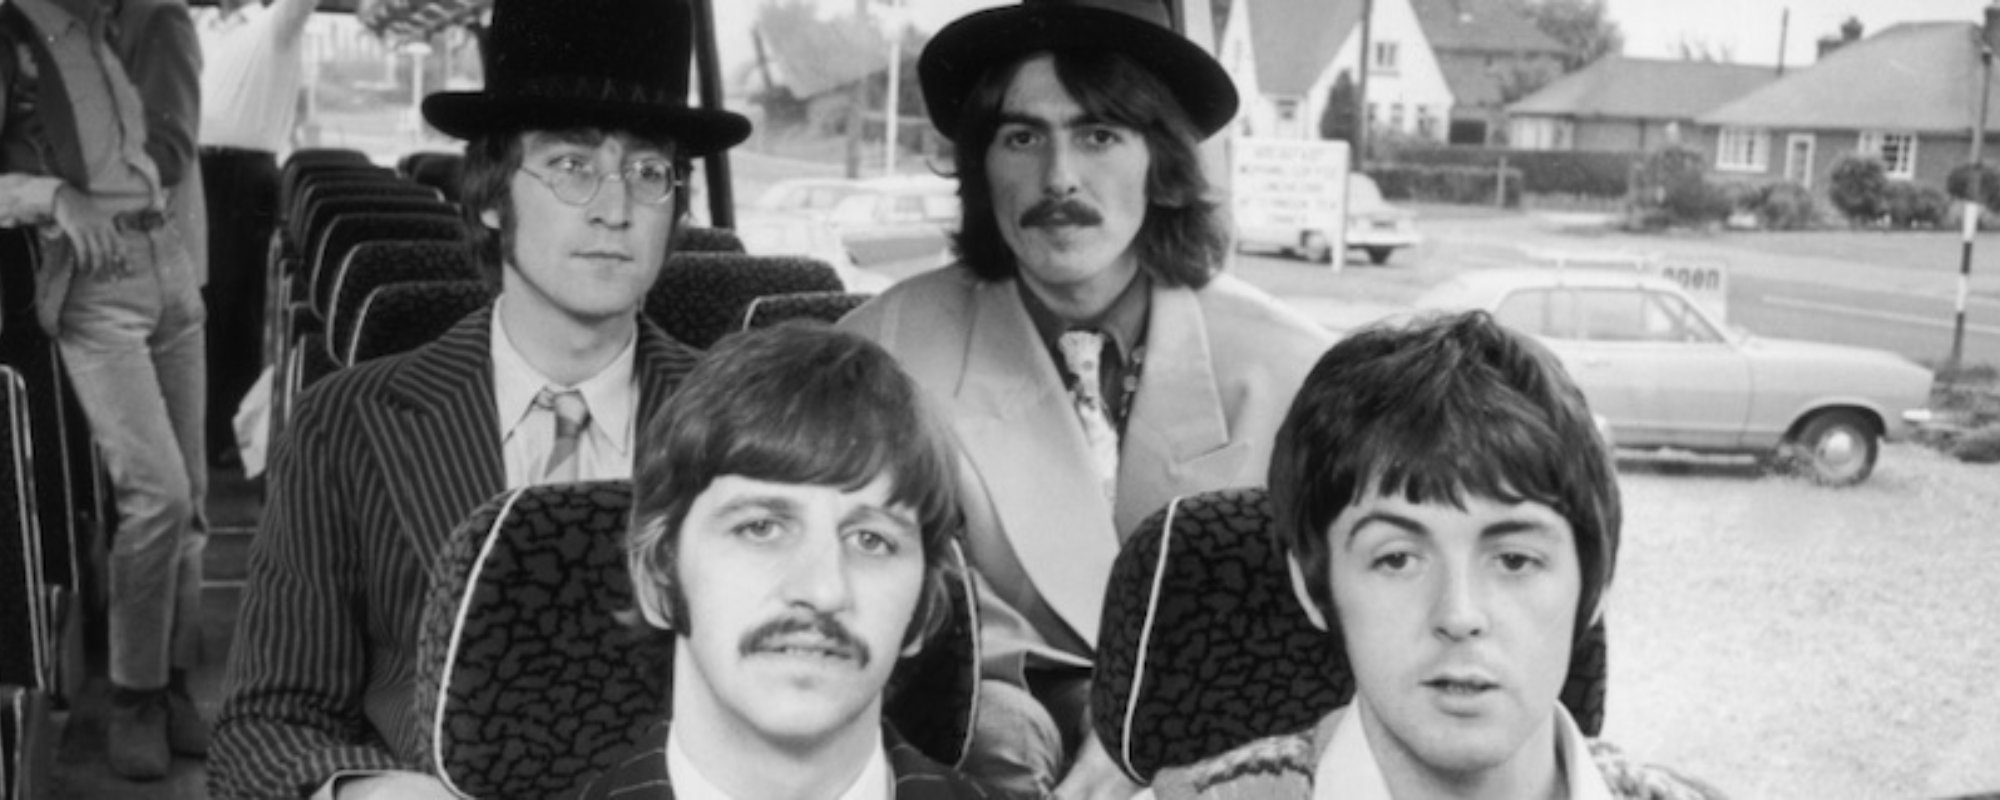 The Beatles’ New Song, “Now and Then,” Tops U.K. Singles Chart, Setting Multiple Records